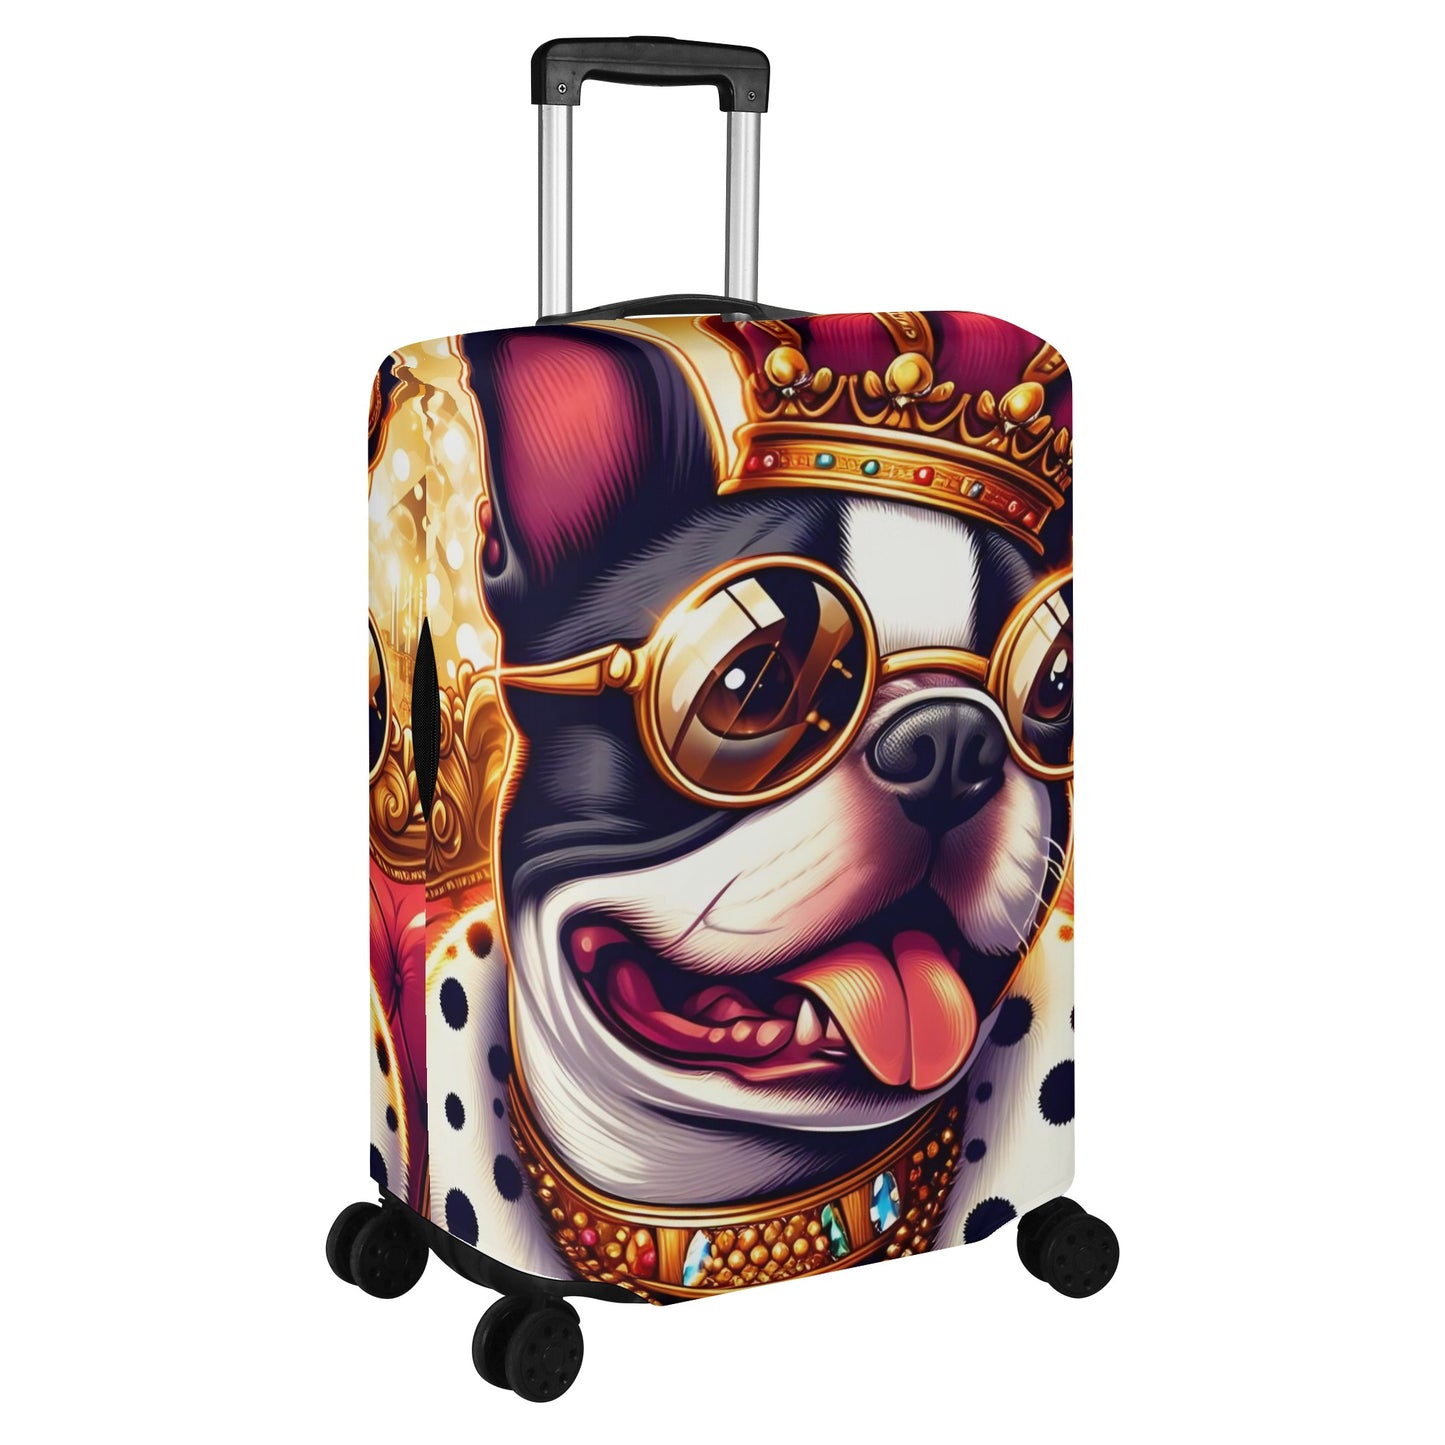 Ziggy - Luggage Cover for Boston Terrier lovers